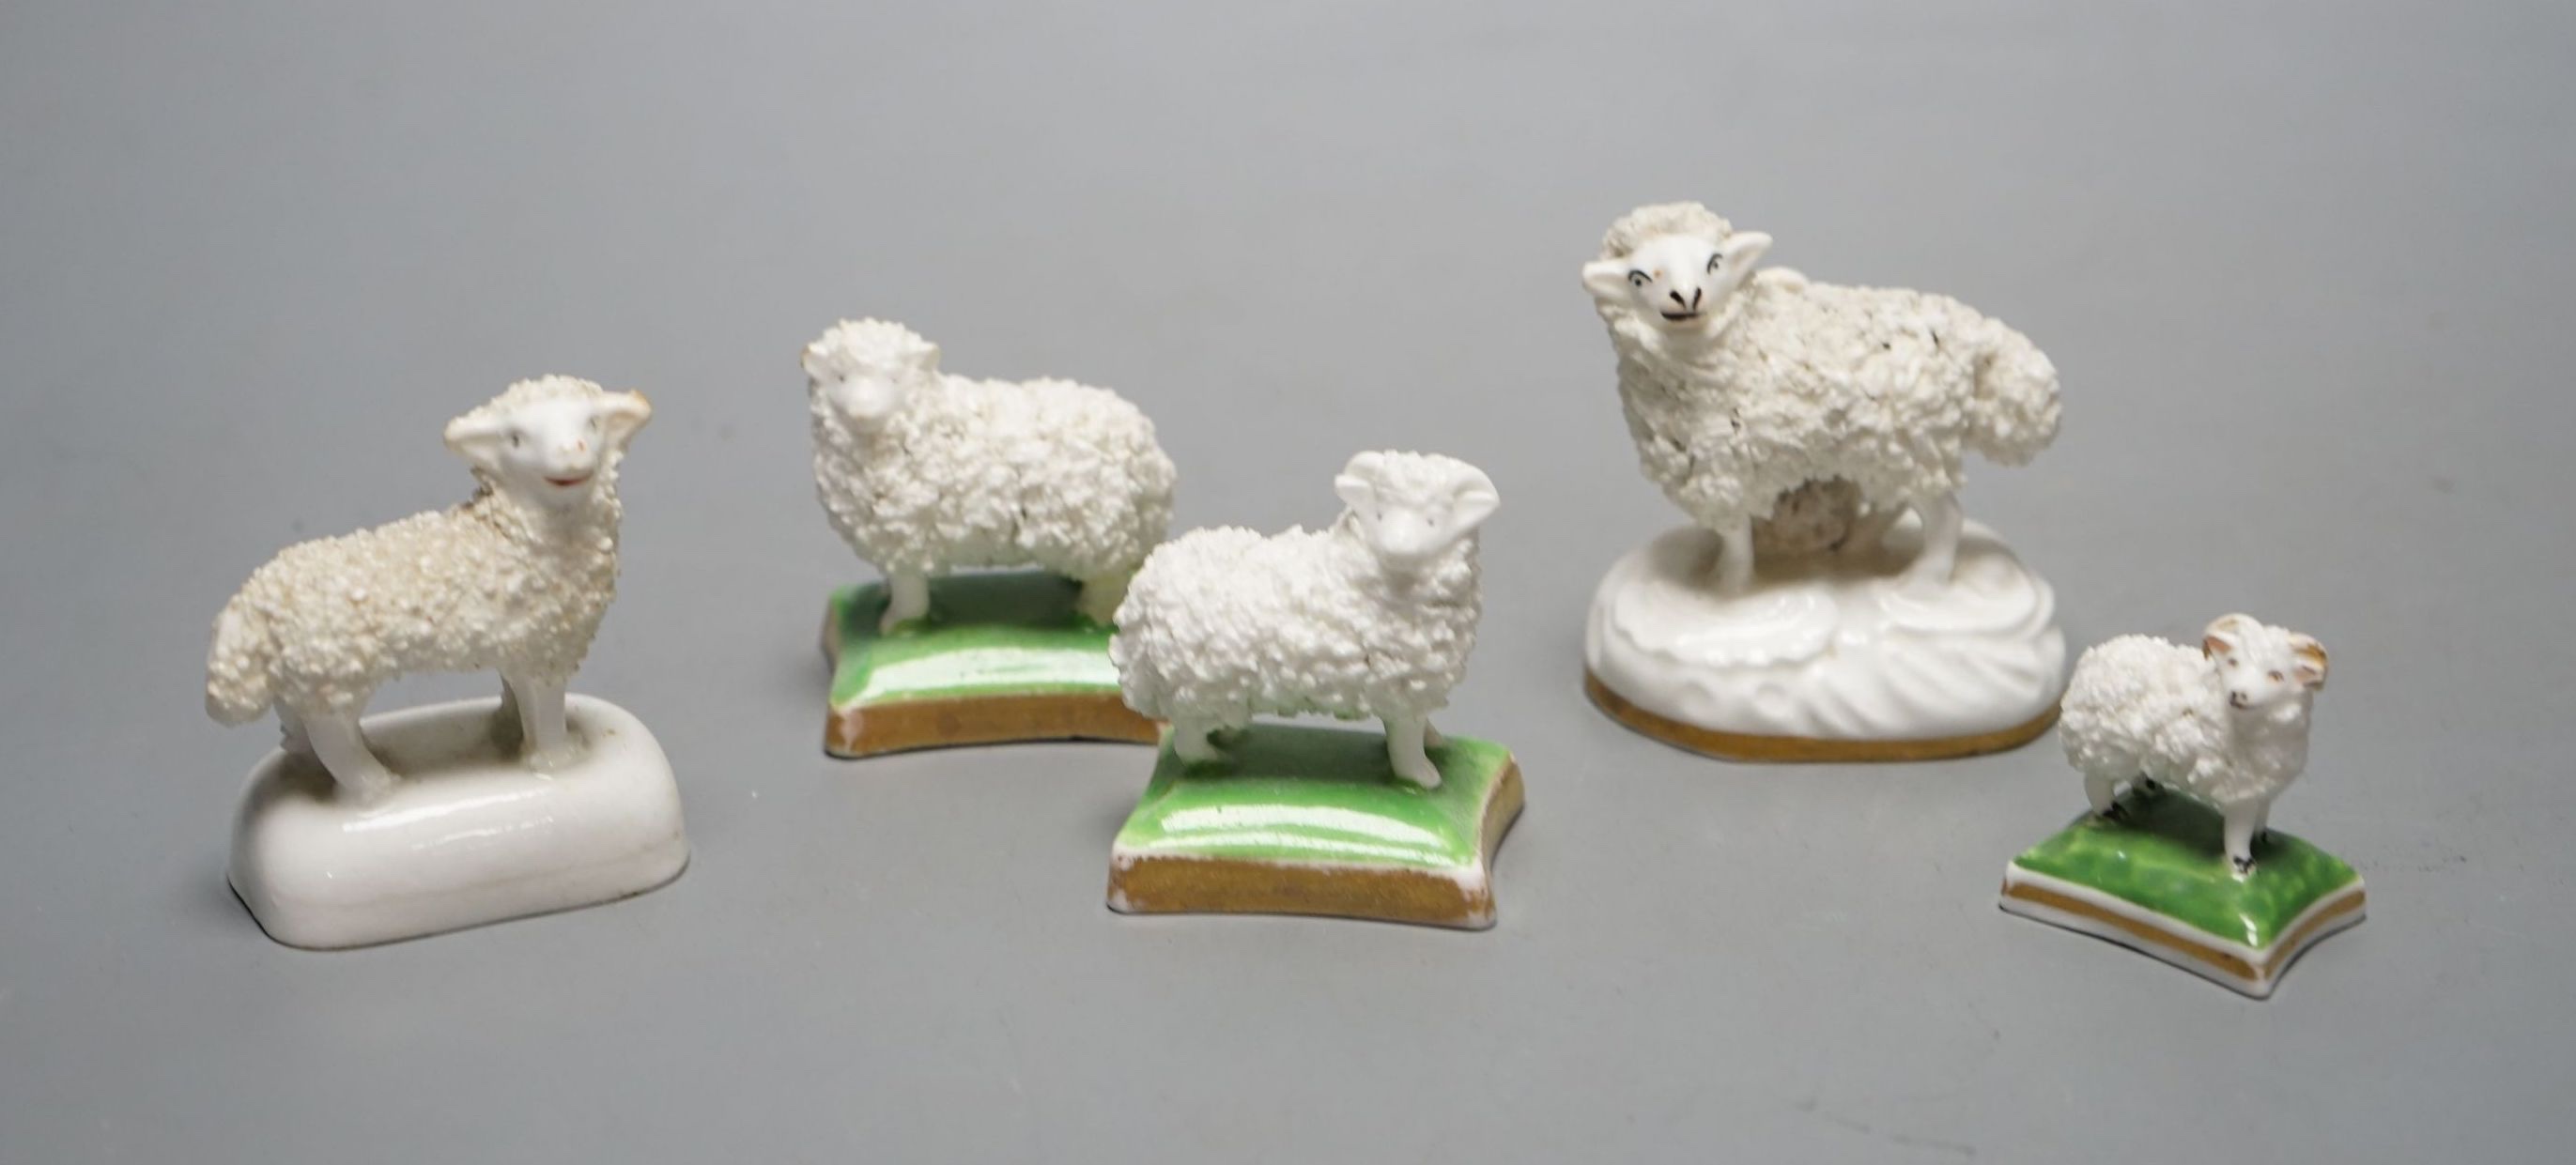 Five Staffordshire porcelain toy models of sheep, c.1830–50, including a pair of a ewe and a ram with green and gilt bases. Provenance: Dennis G. Rice collection, largest 6 cms high.